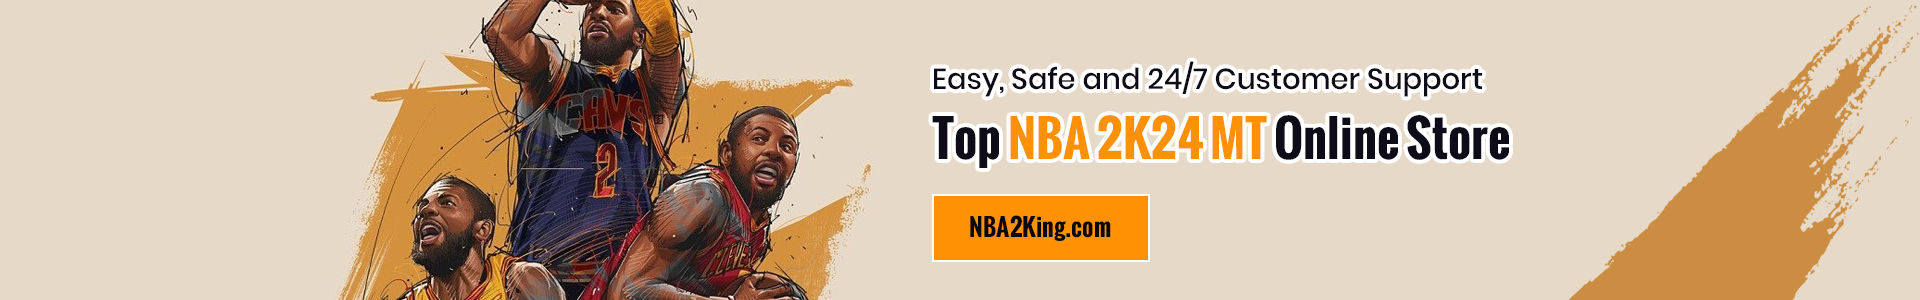 Easy, Safe and 24/7 Customer Support Top NBA 2K24 